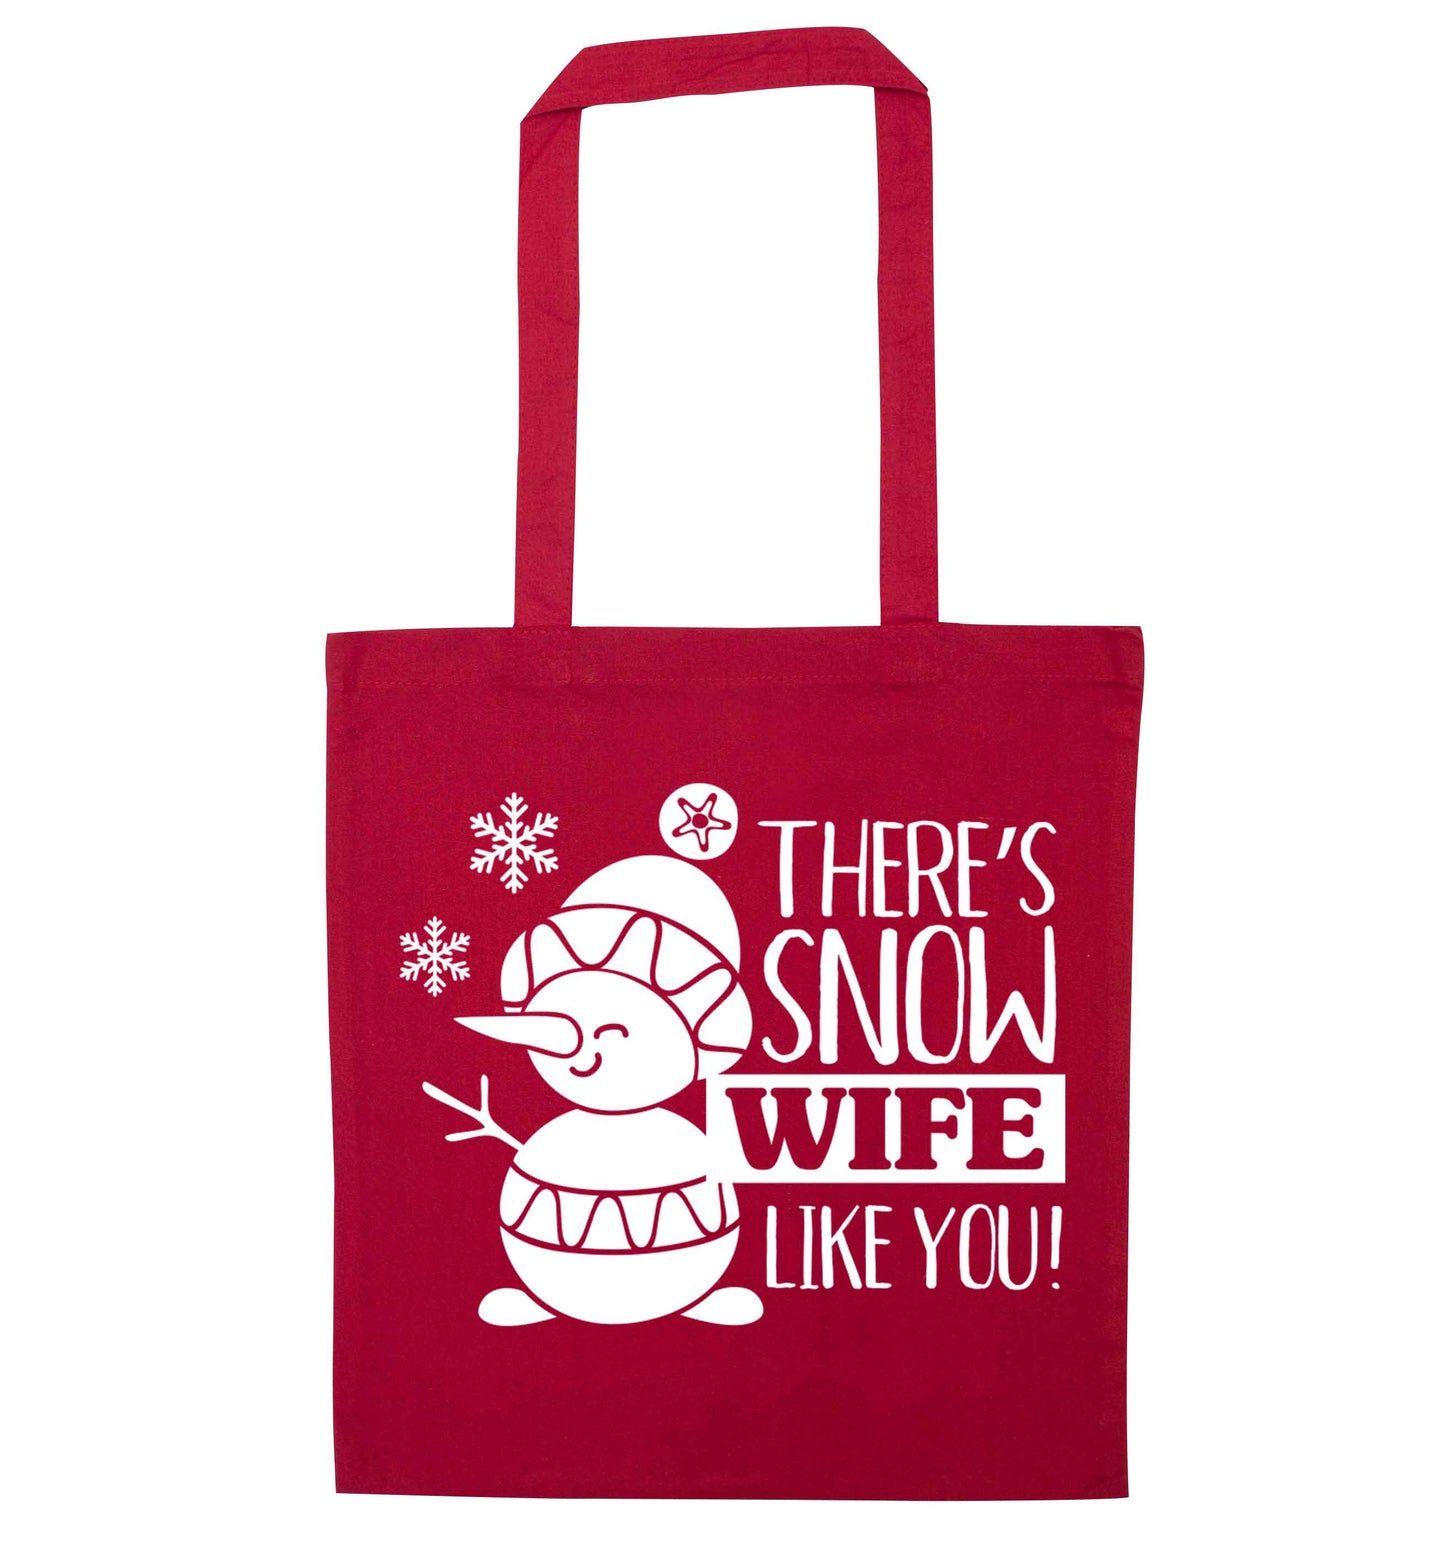 There's snow wife like you red tote bag